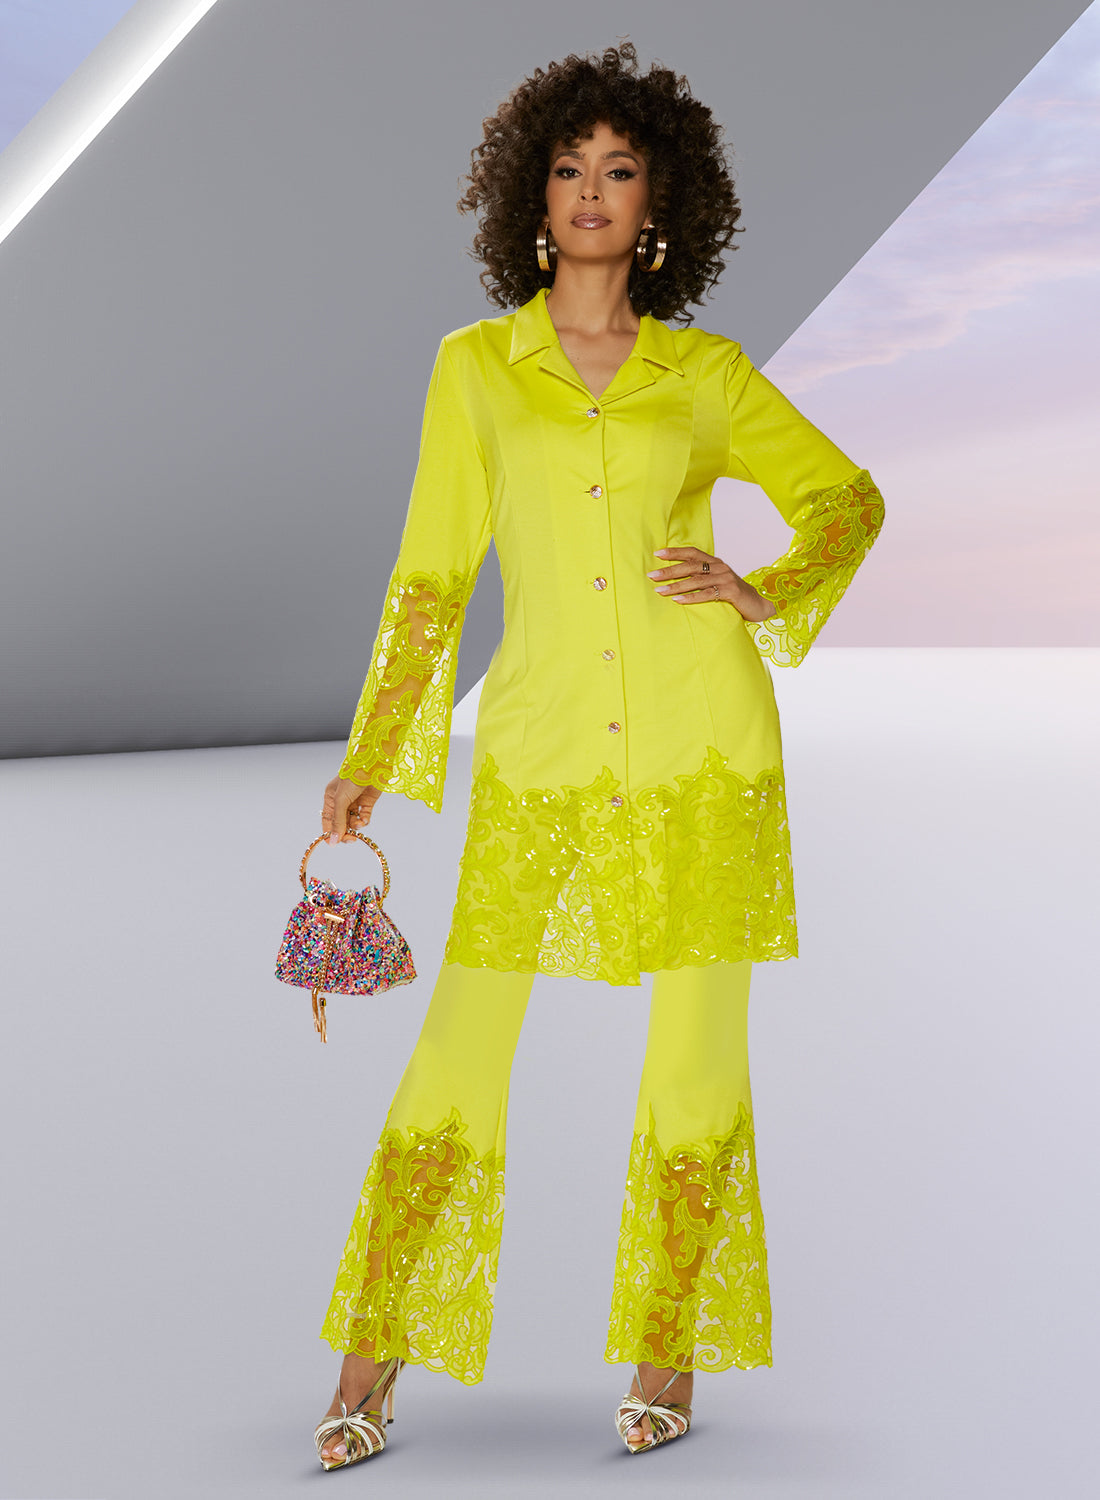 Love the Queen 17563p - Chartreuse - Soft Stretch Fabric with Embroidery Sequins on Mesh Fabric Pants with Pockets